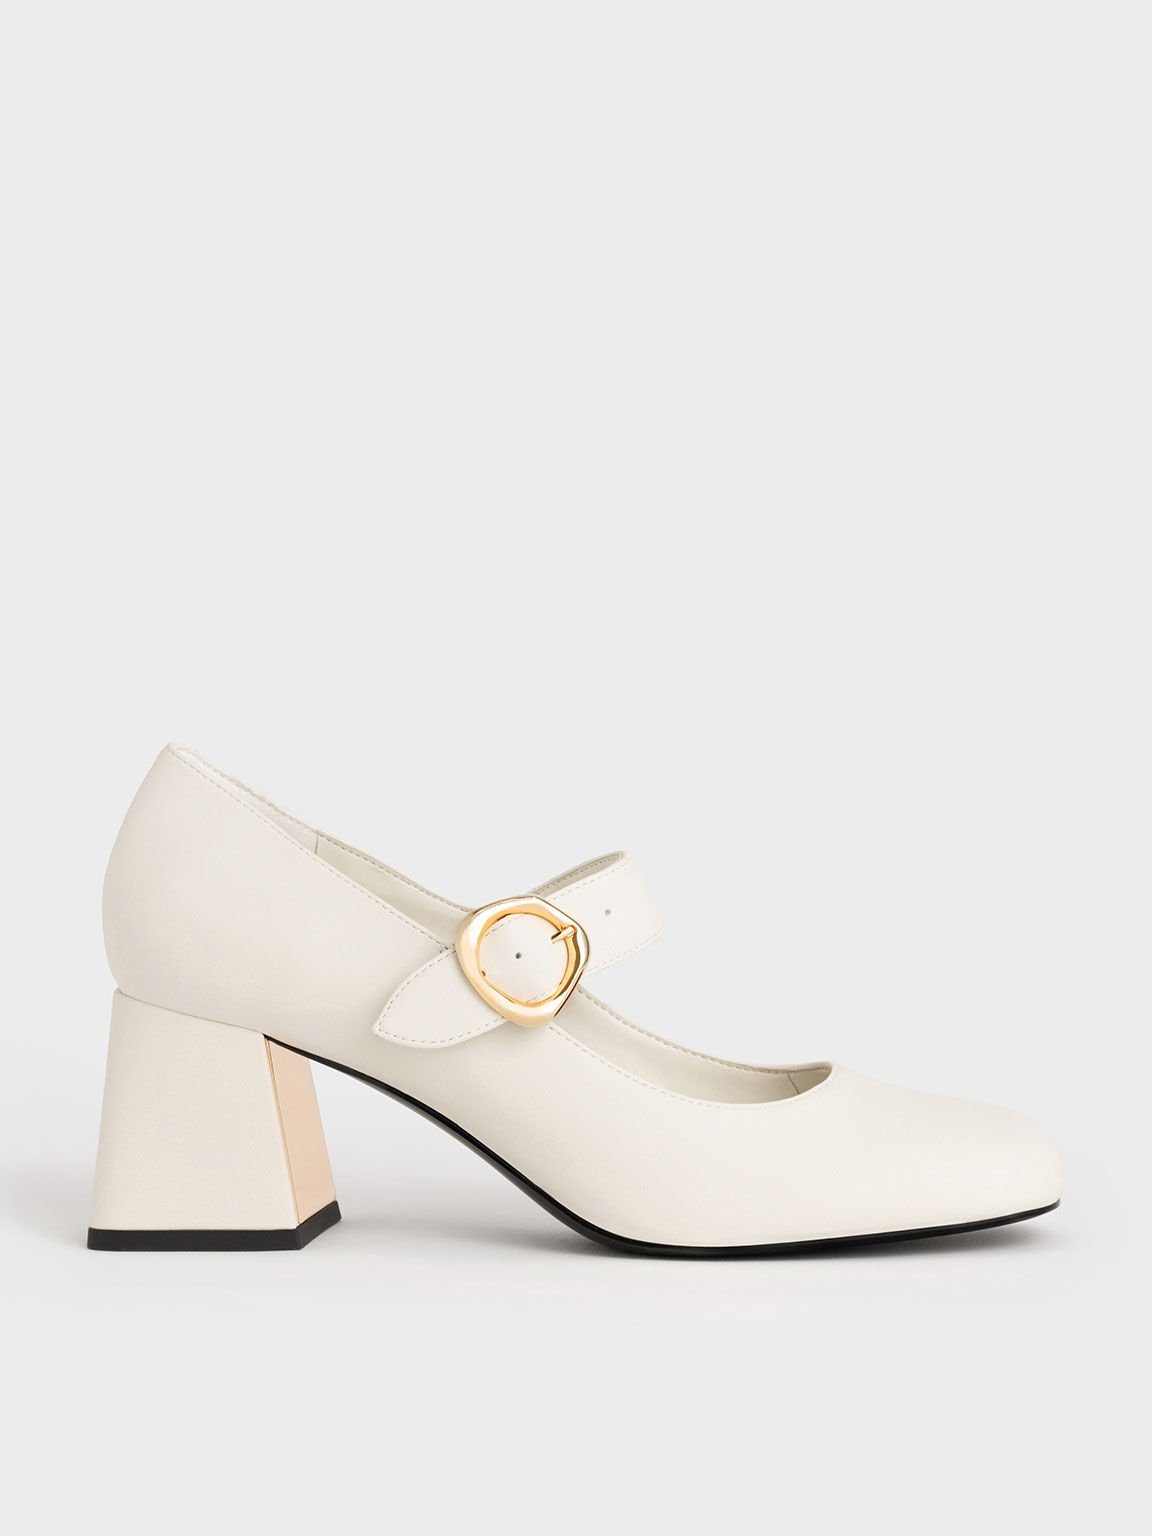 Shoes Pumps Mary Jane Pumps Tamaris Mary Jane Pumps light grey-cream casual look 